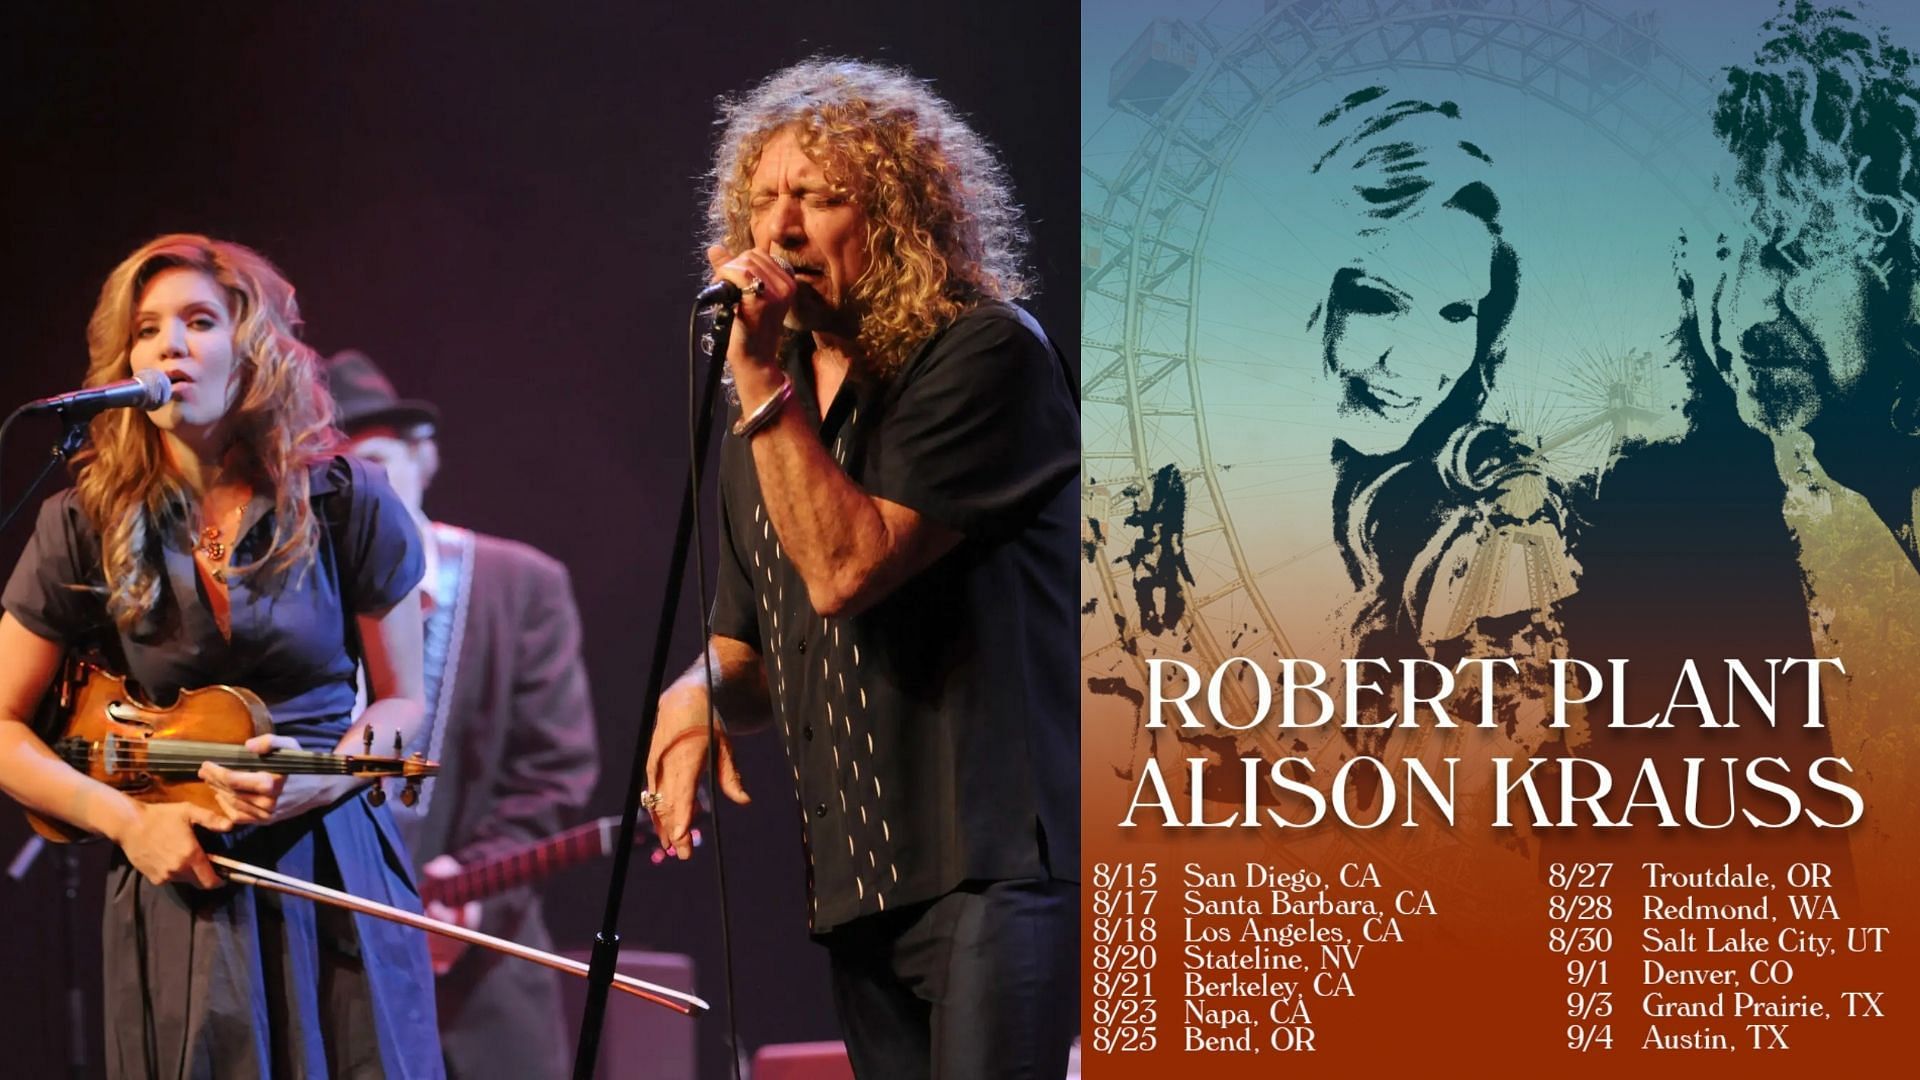 Robert Plant and Alison Krauss 2022 tour tickets Presale, where to buy